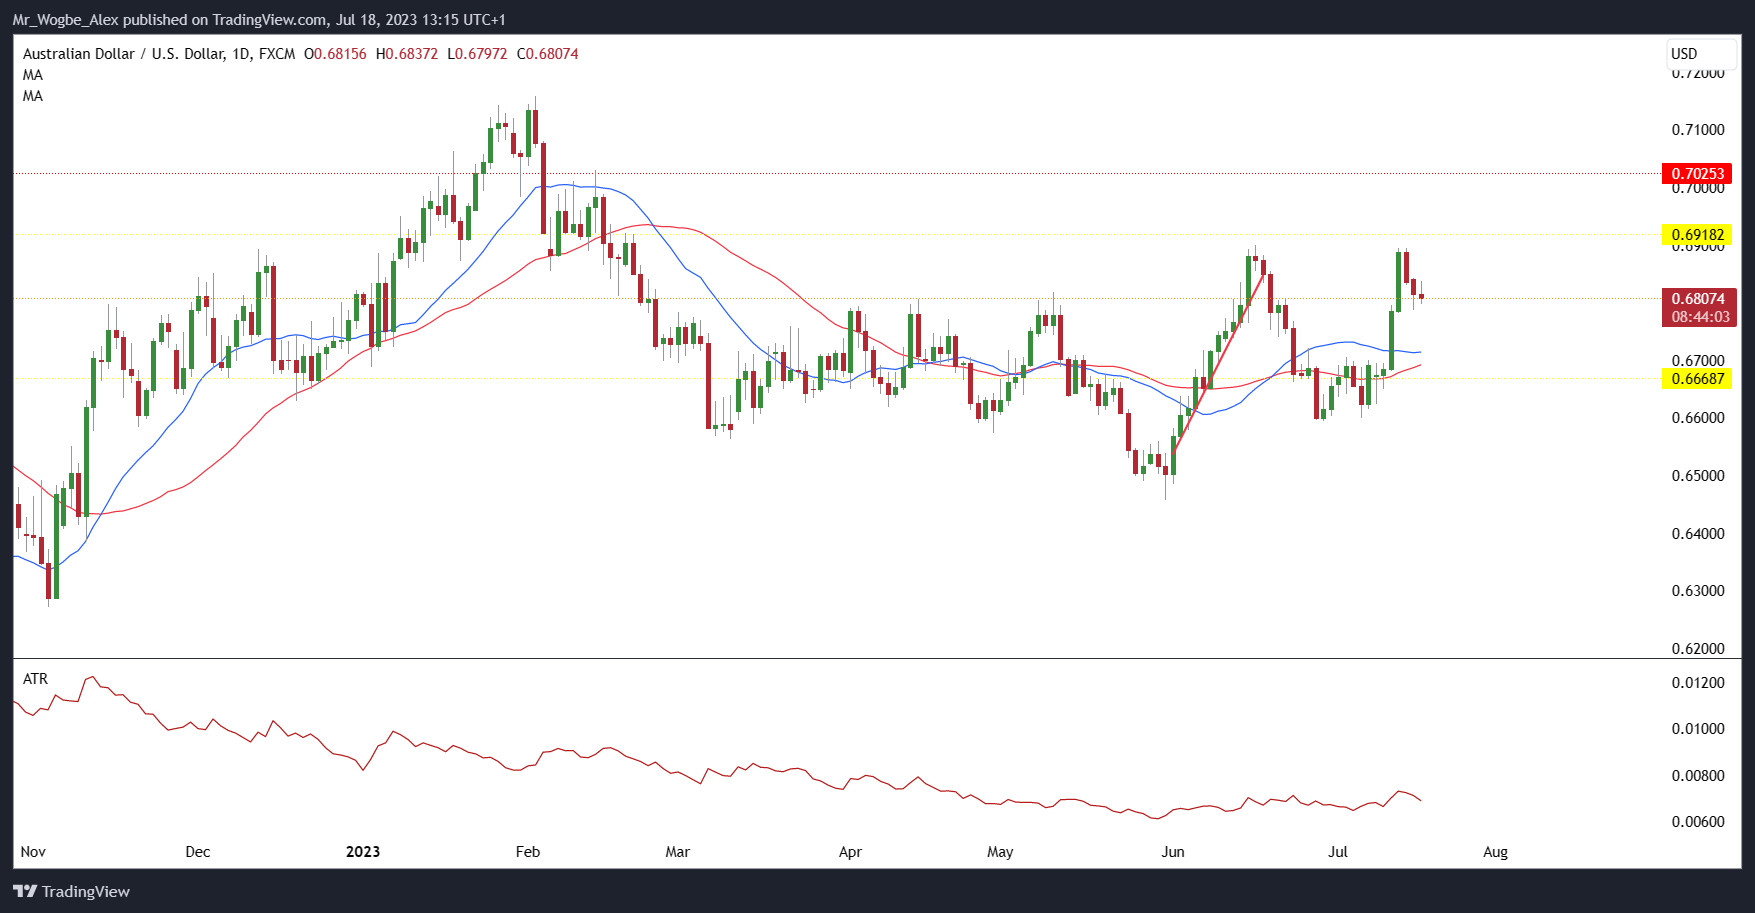 AUD/USD daily chart from TradingView